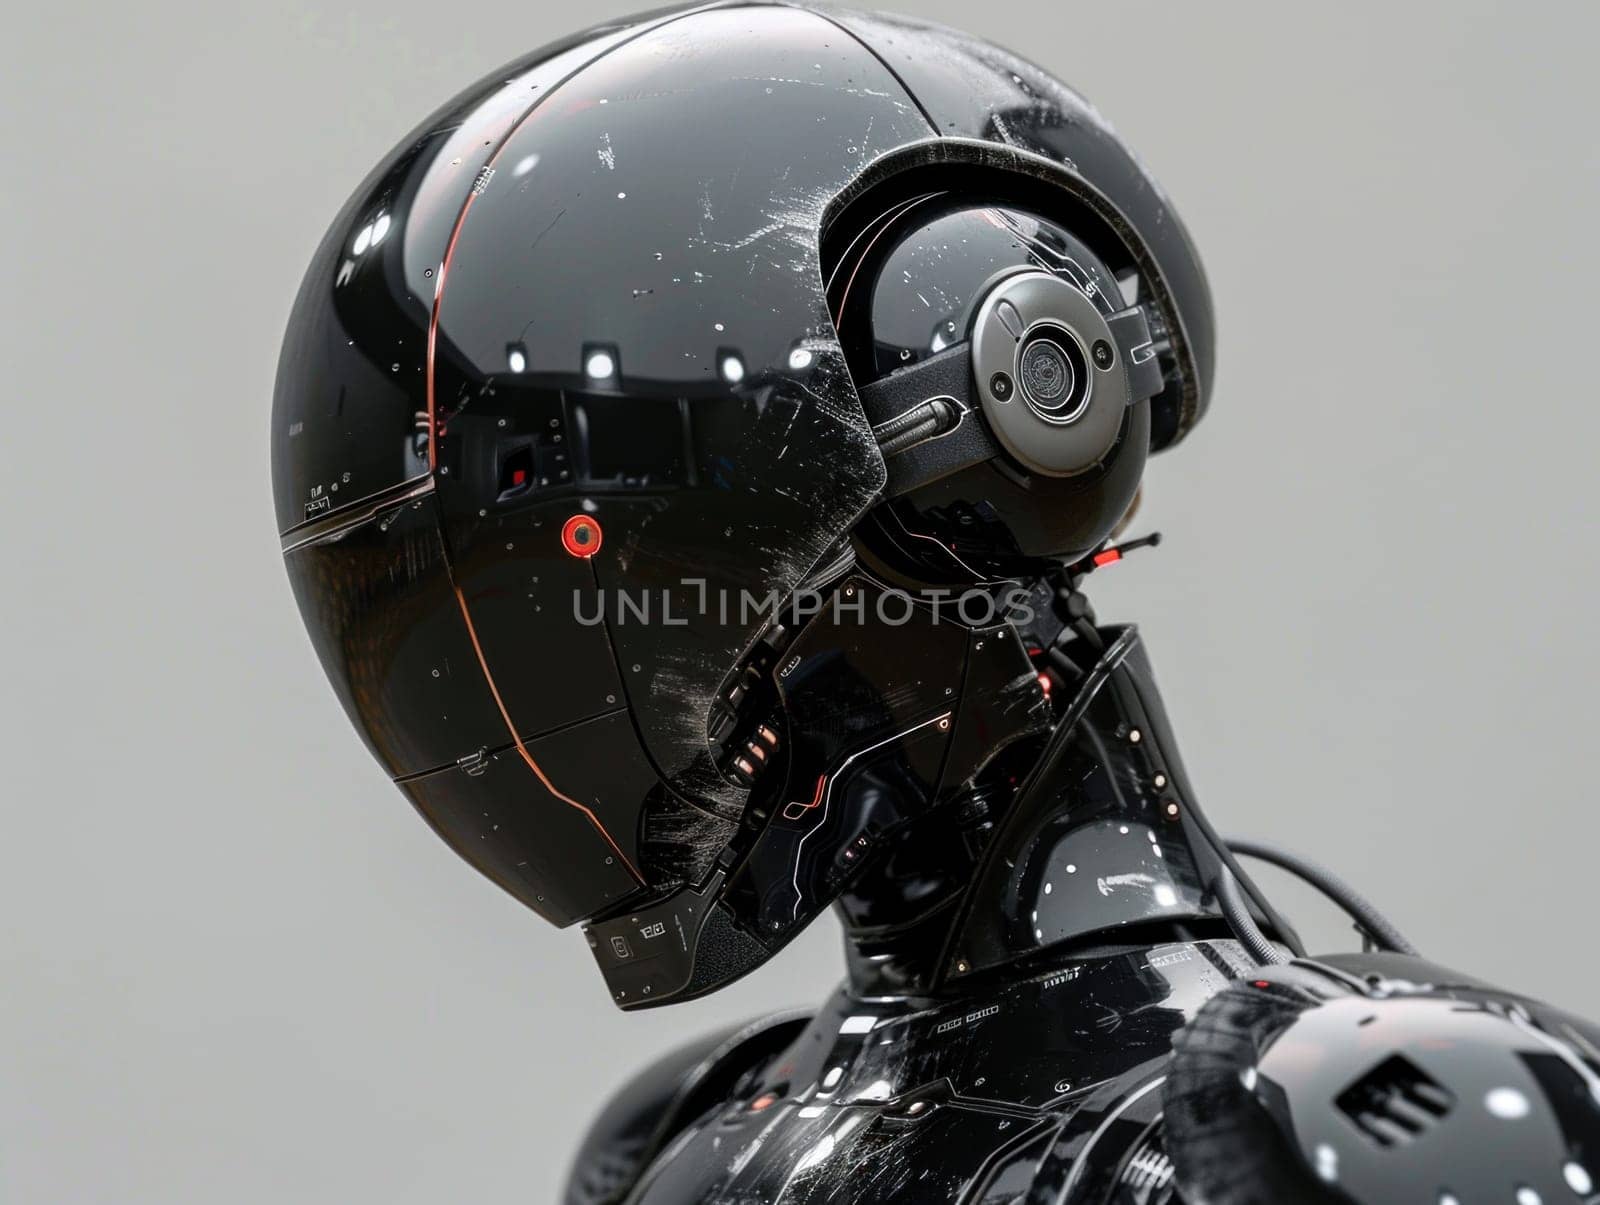 Robot Wearing Helmet by but_photo